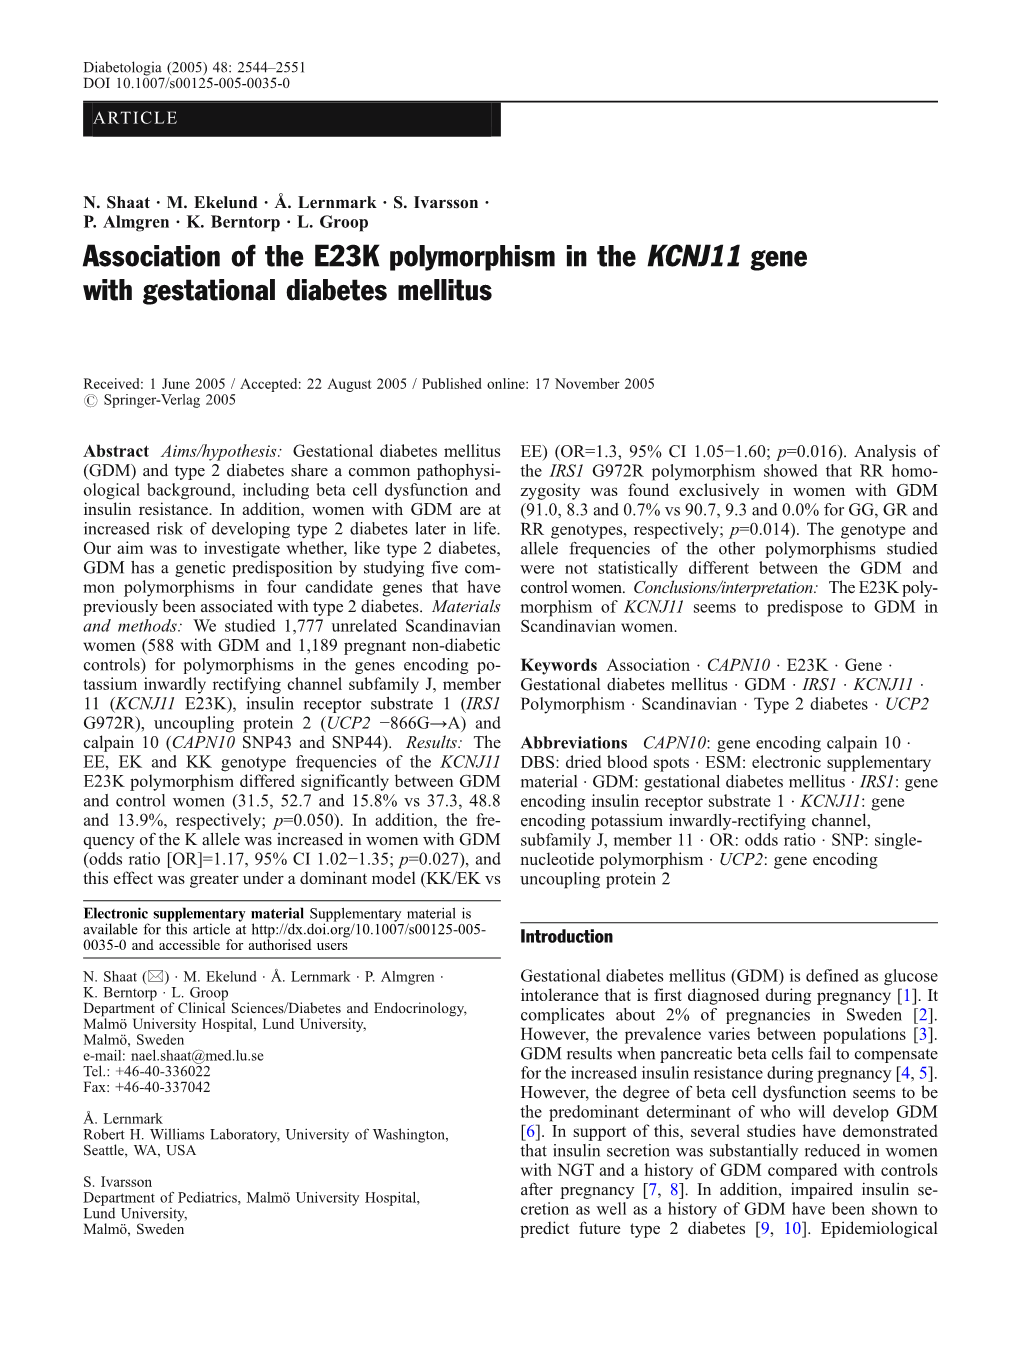 Association of the E23K Polymorphism in the KCNJ11 Gene with Gestational Diabetes Mellitus